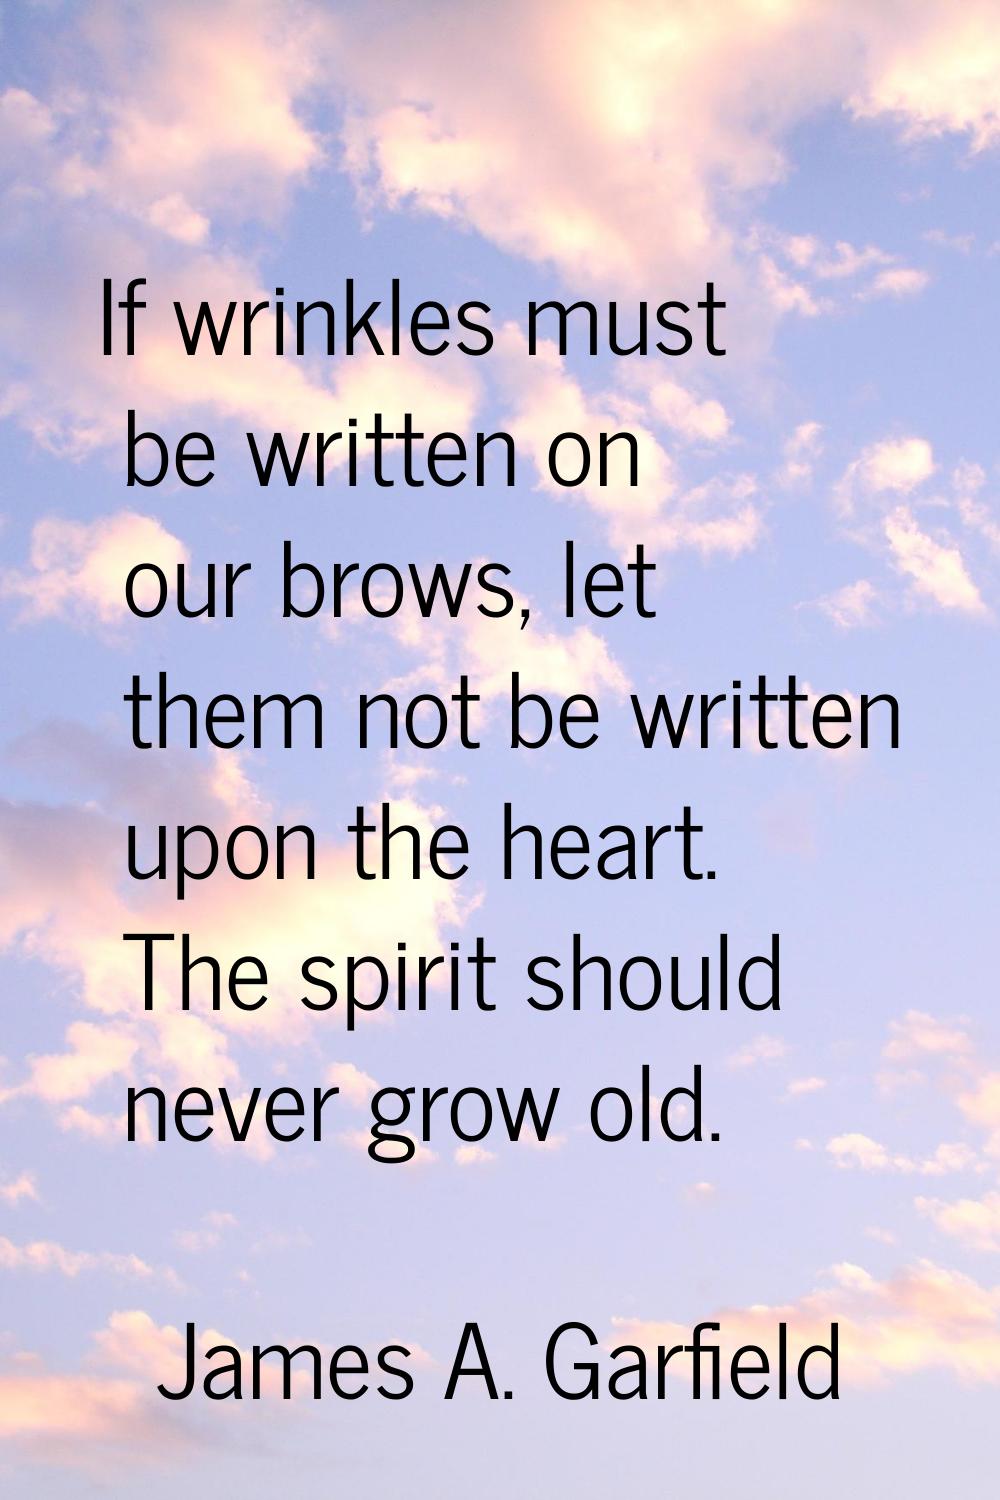 If wrinkles must be written on our brows, let them not be written upon the heart. The spirit should